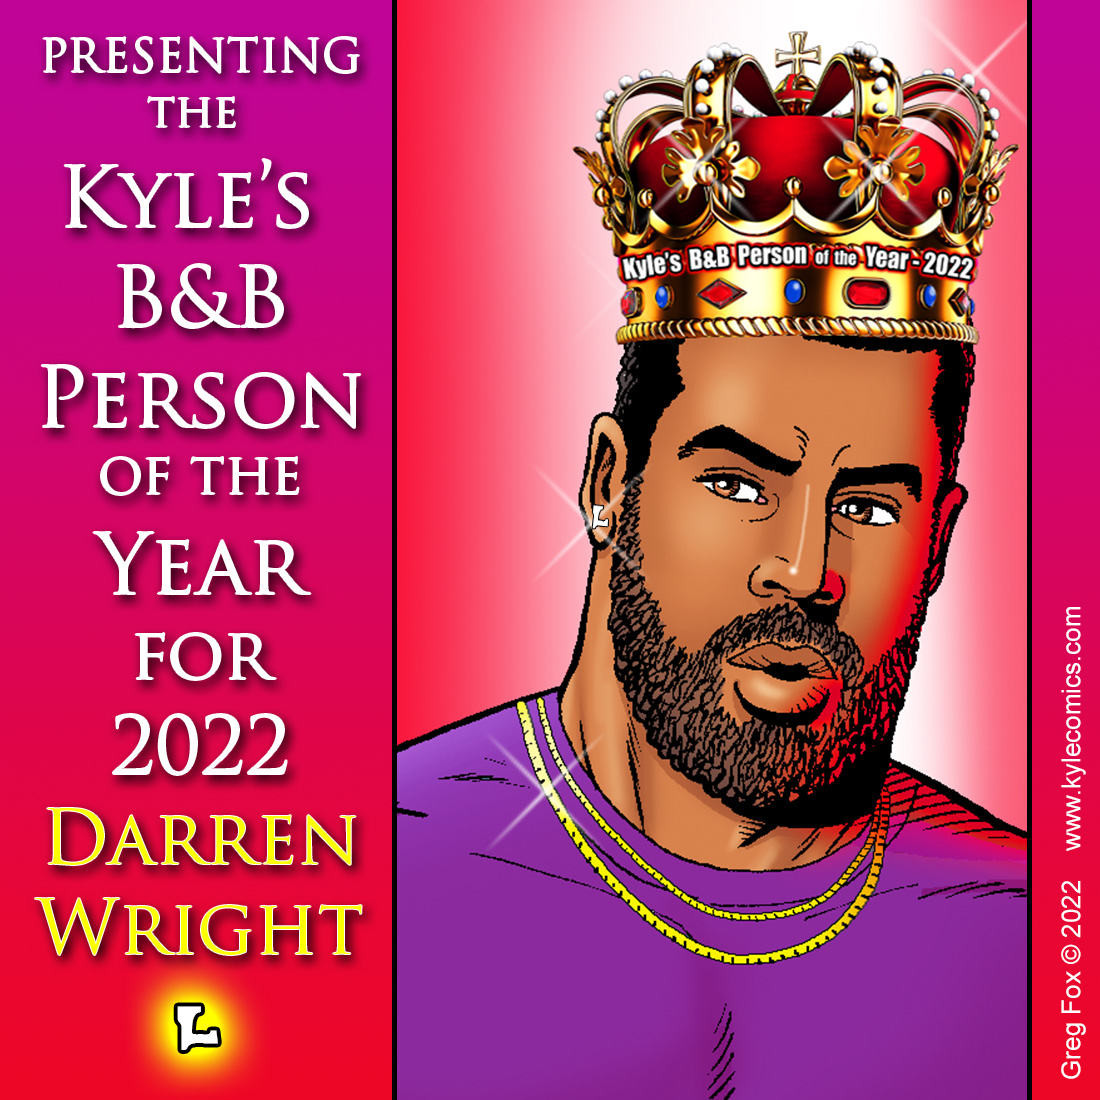 BREAKING NEWS: Darren Wins Kyle's B&B Person of the Year for 2022!!!👑Head on over to the Kyle's B&B website to see all the stats, and who came in 2nd, 3rd, and all the other positions! Thank you to everyone who voted!👑kylecomics.com👑#kylesbnb #webcomic #lgbtqcomics